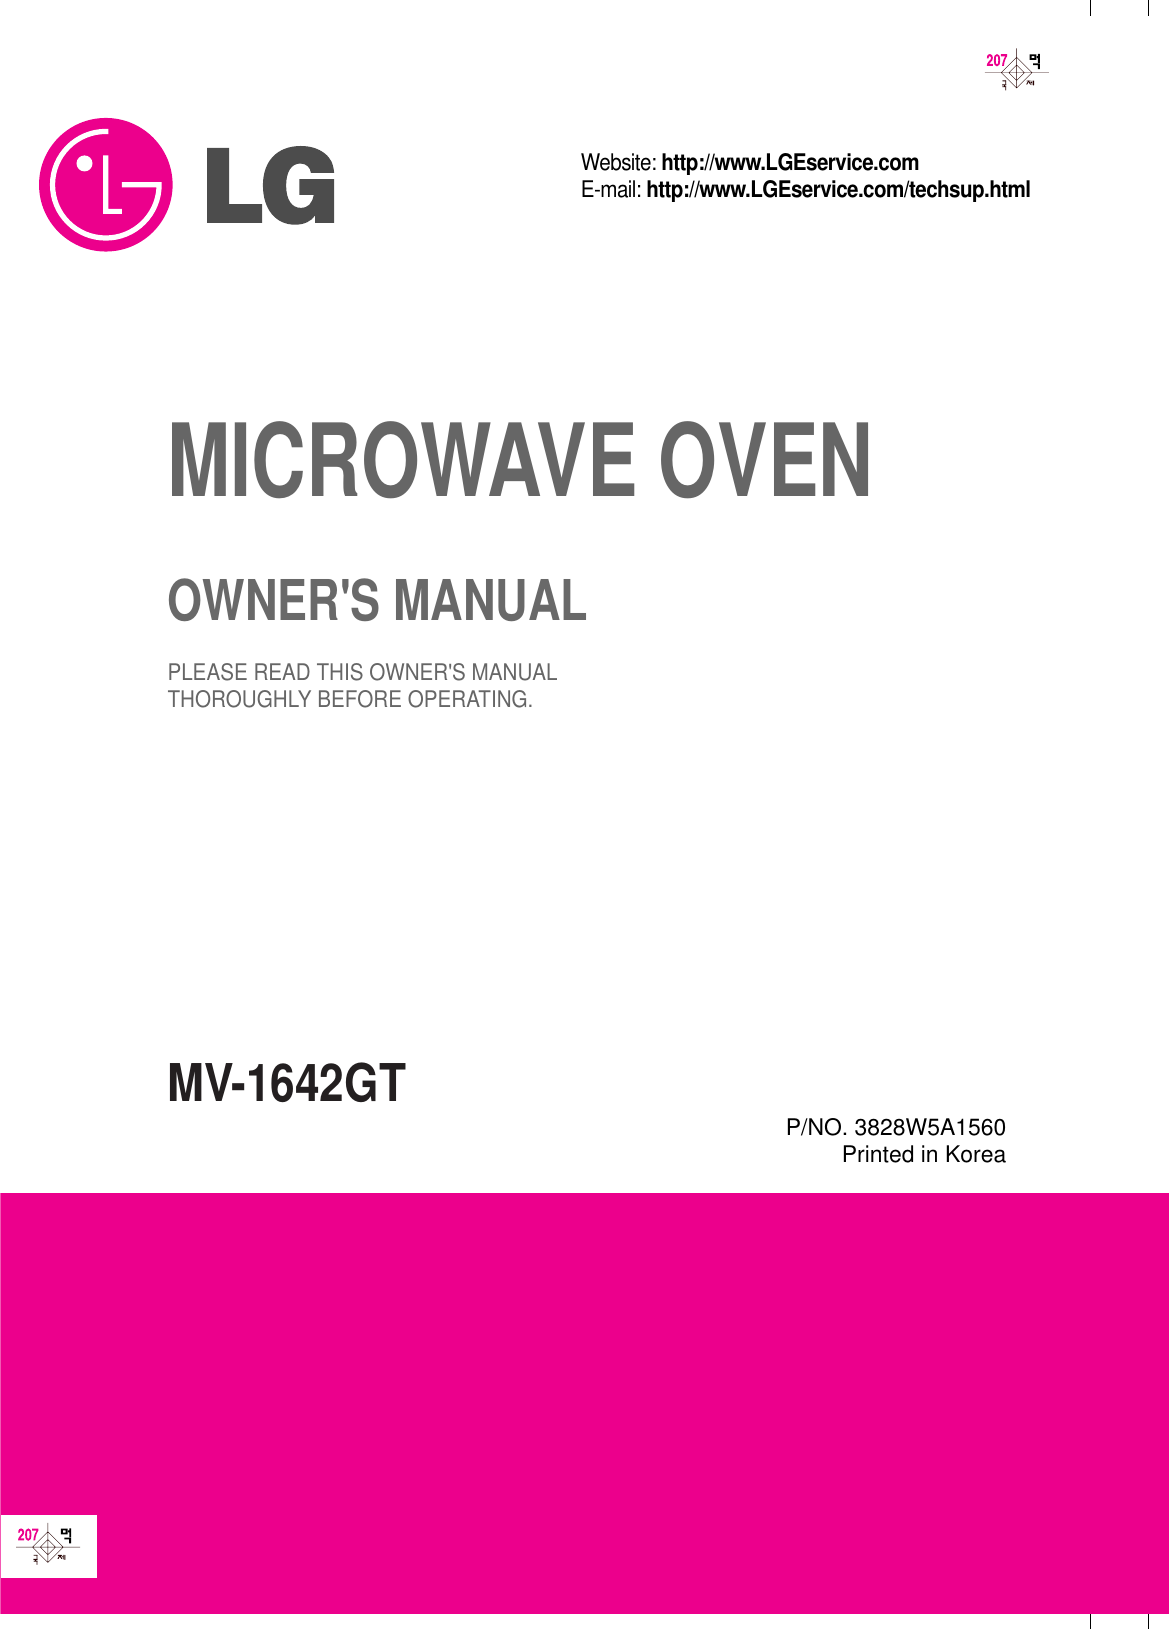 P/NO. 3828W5A1560Printed in KoreaMV-1642GTMICROWAVE OVENOWNER&apos;S MANUALPLEASE READ THIS OWNER&apos;S MANUALTHOROUGHLY BEFORE OPERATING.Website: http://www.LGEservice.comE-mail: http://www.LGEservice.com/techsup.html